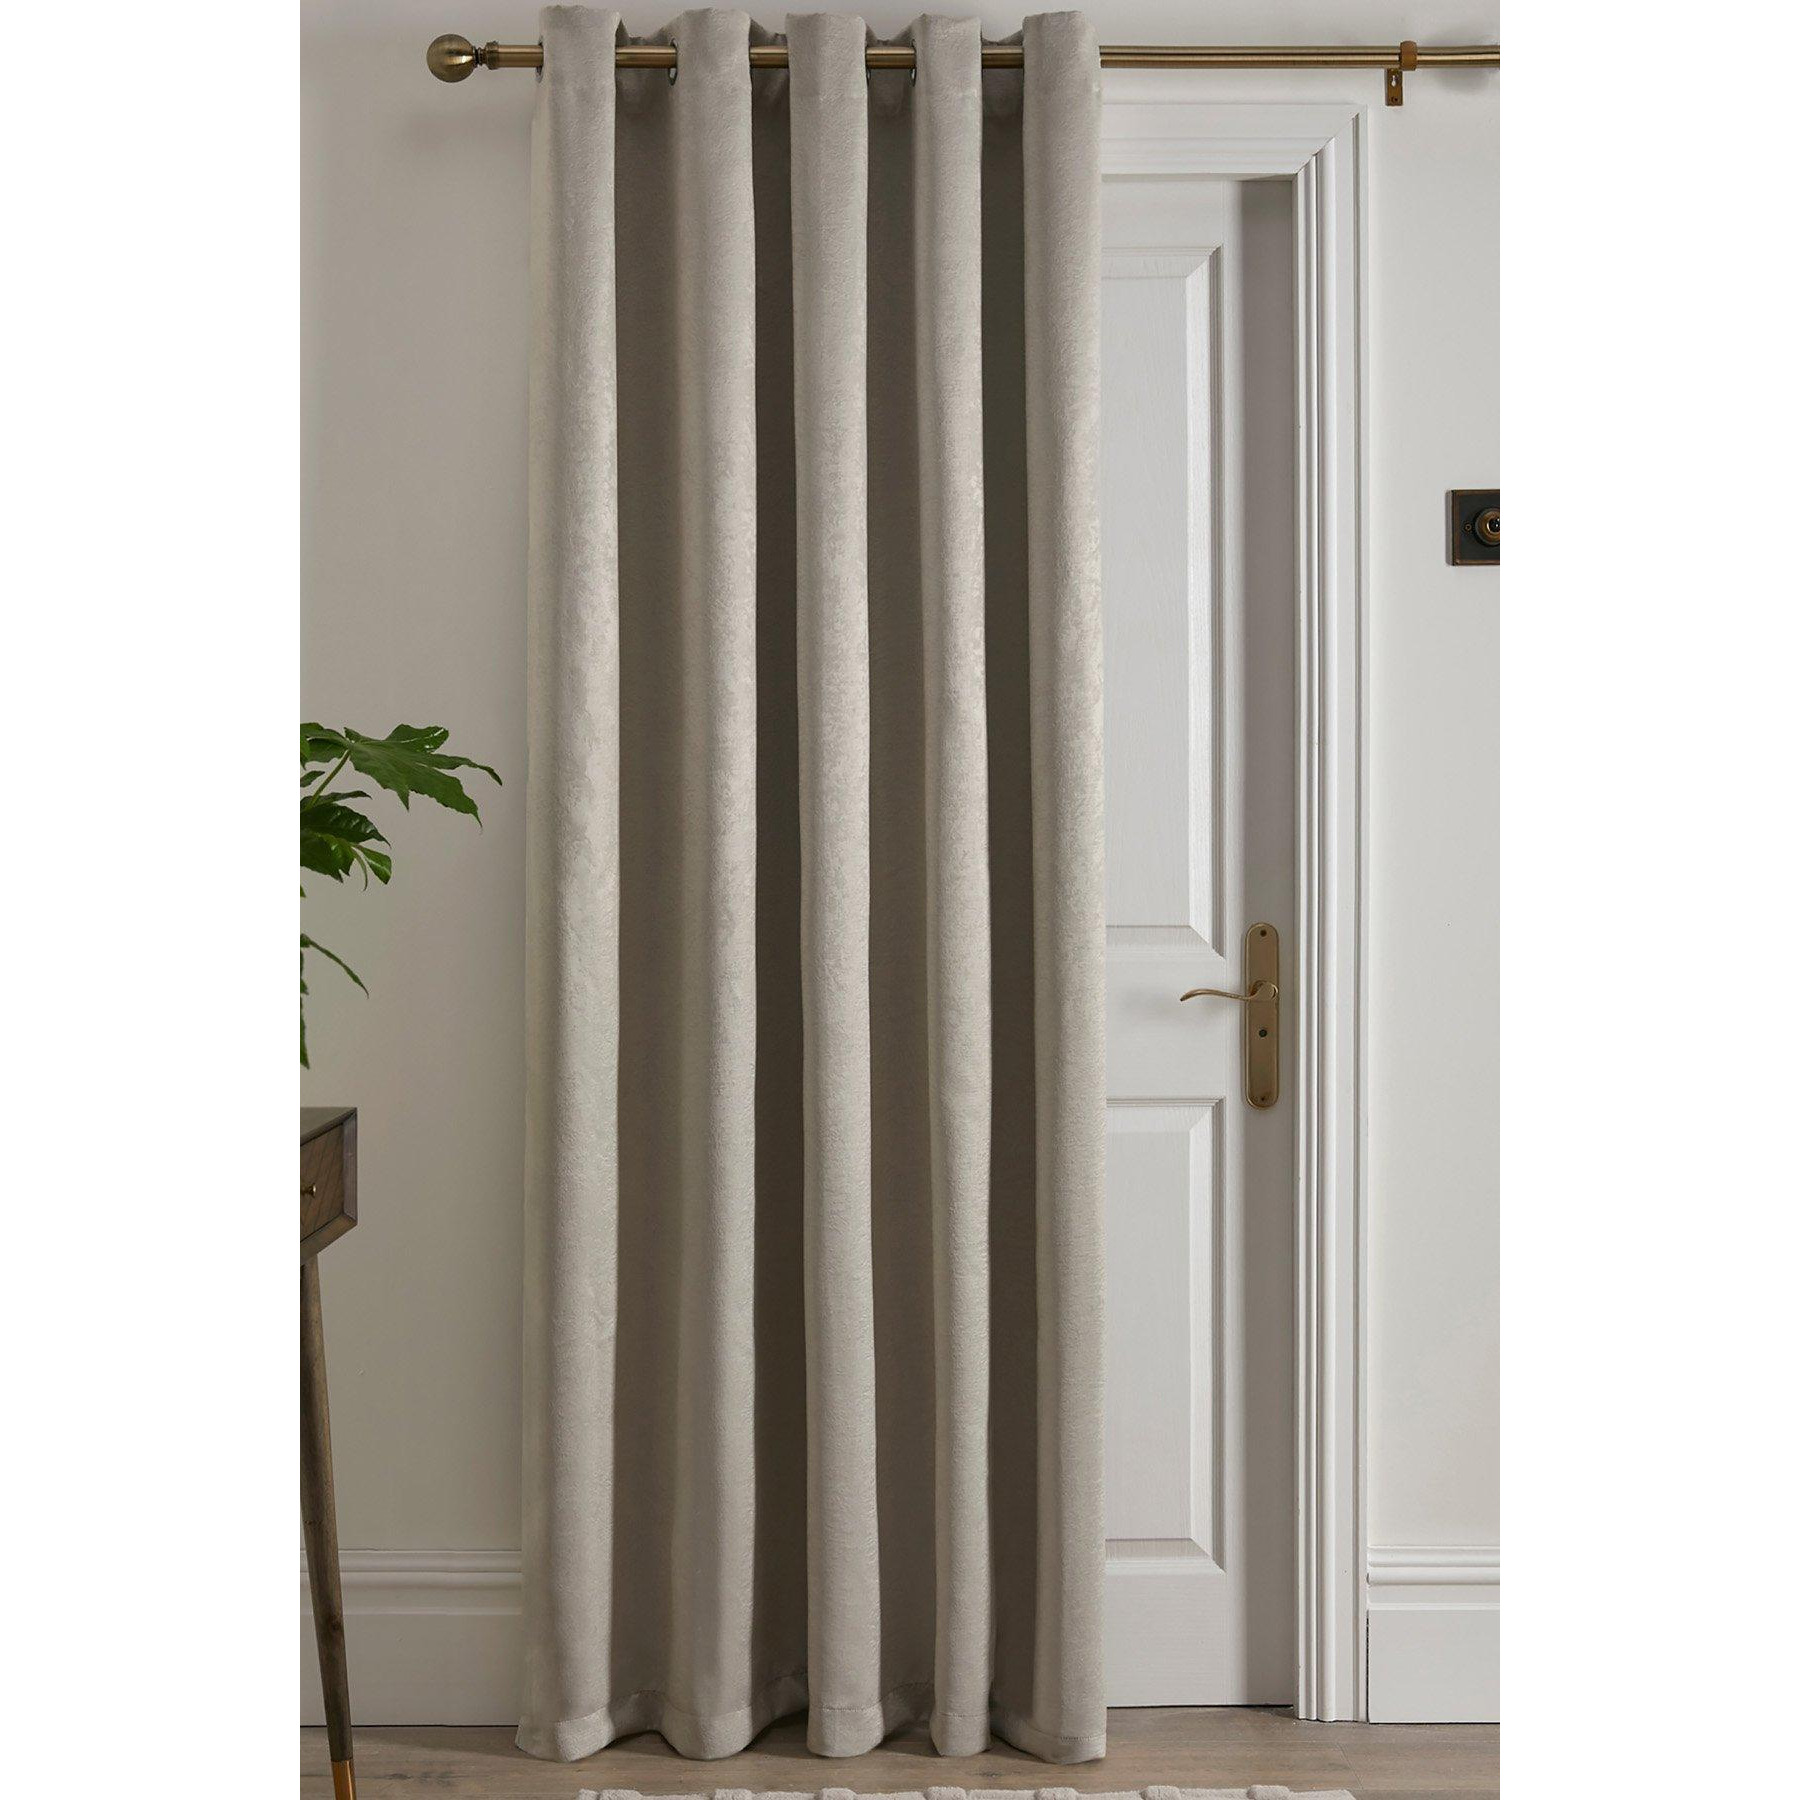 'Strata' Dim out woven Eyelet Single Panel Door Curtain - image 1